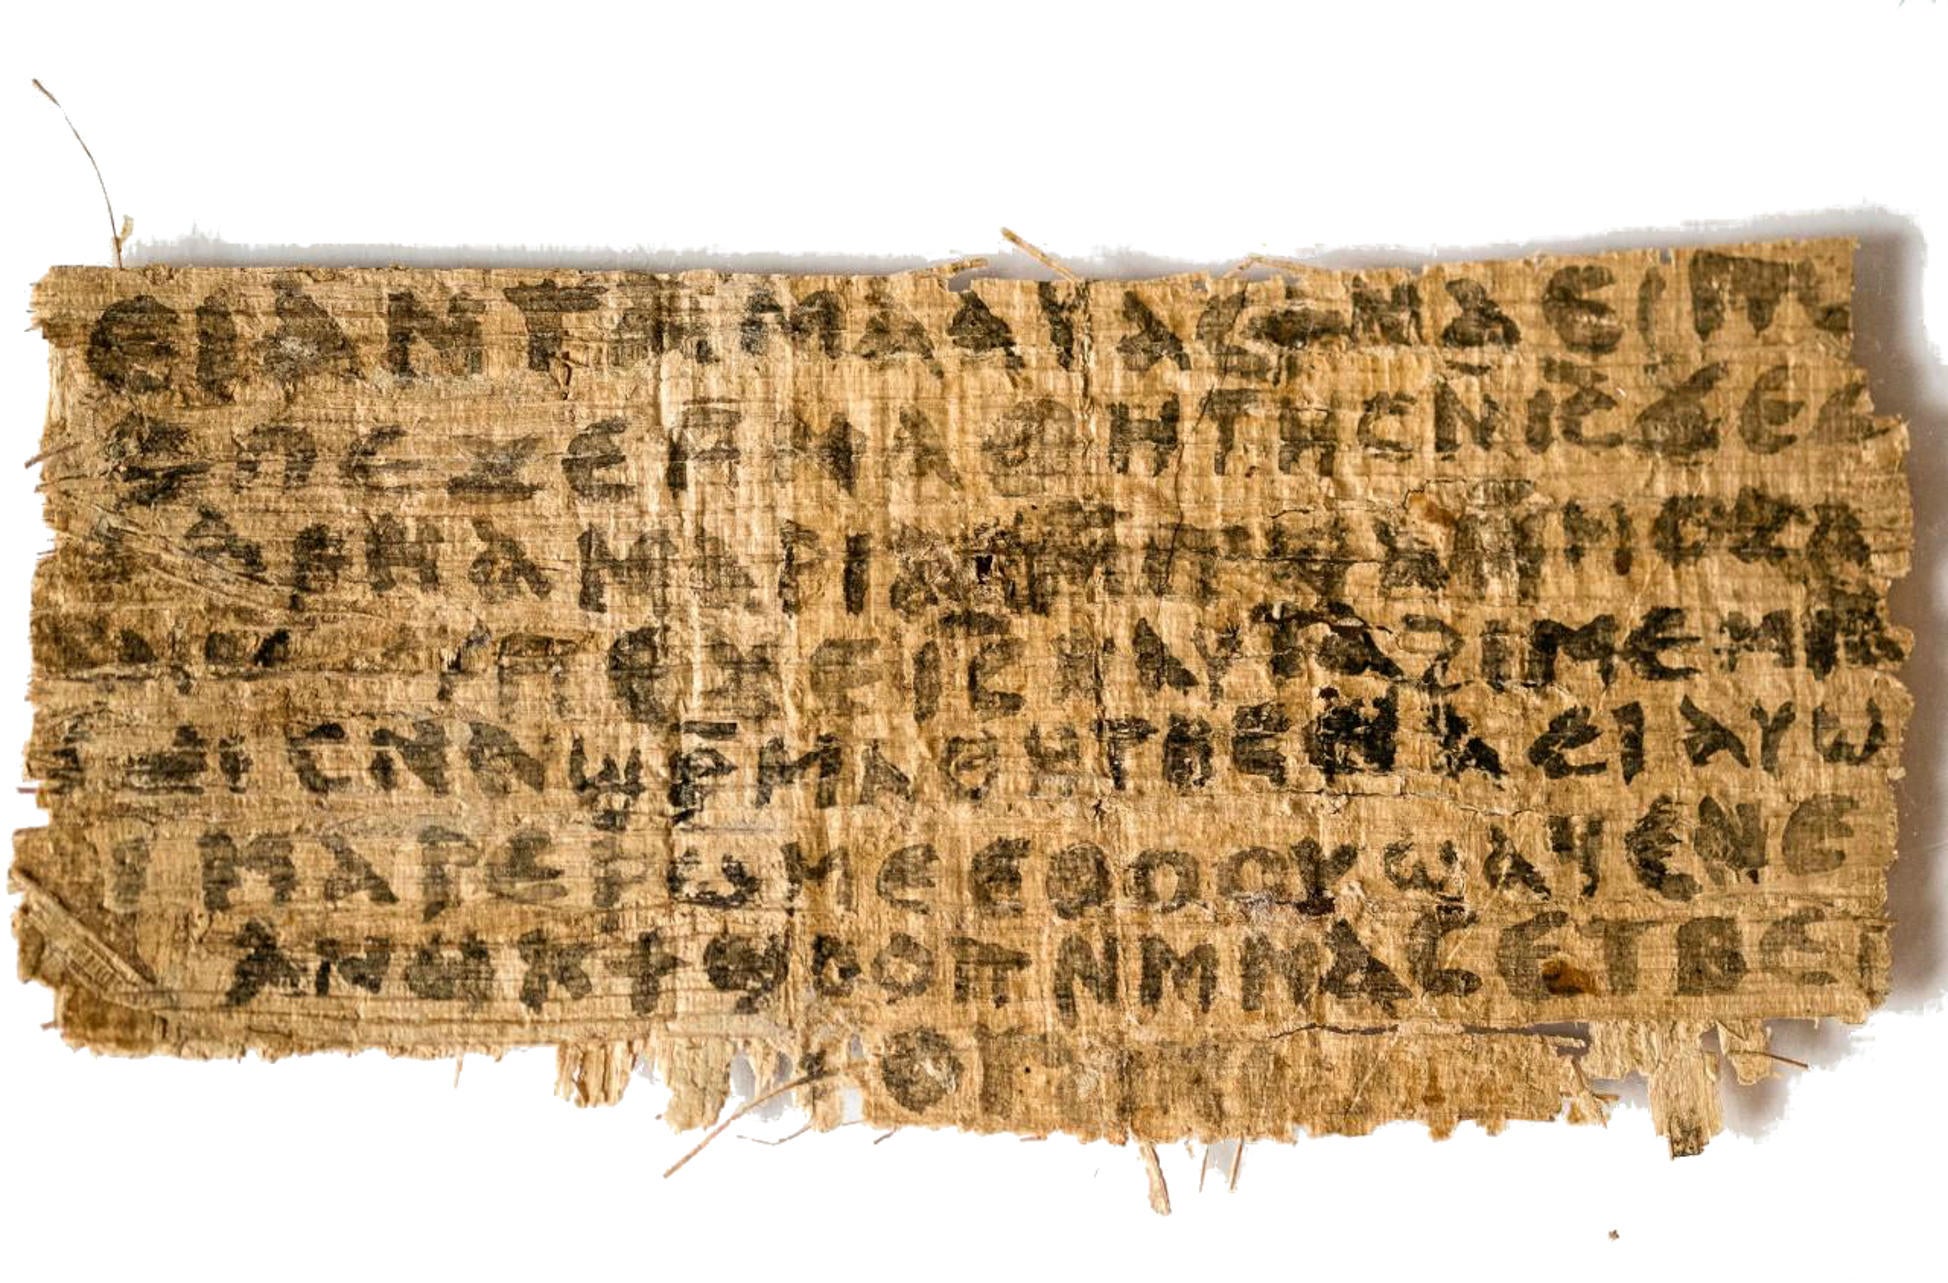 Gospel of Jesus’s Wife, written in Coptic and considered a forgery